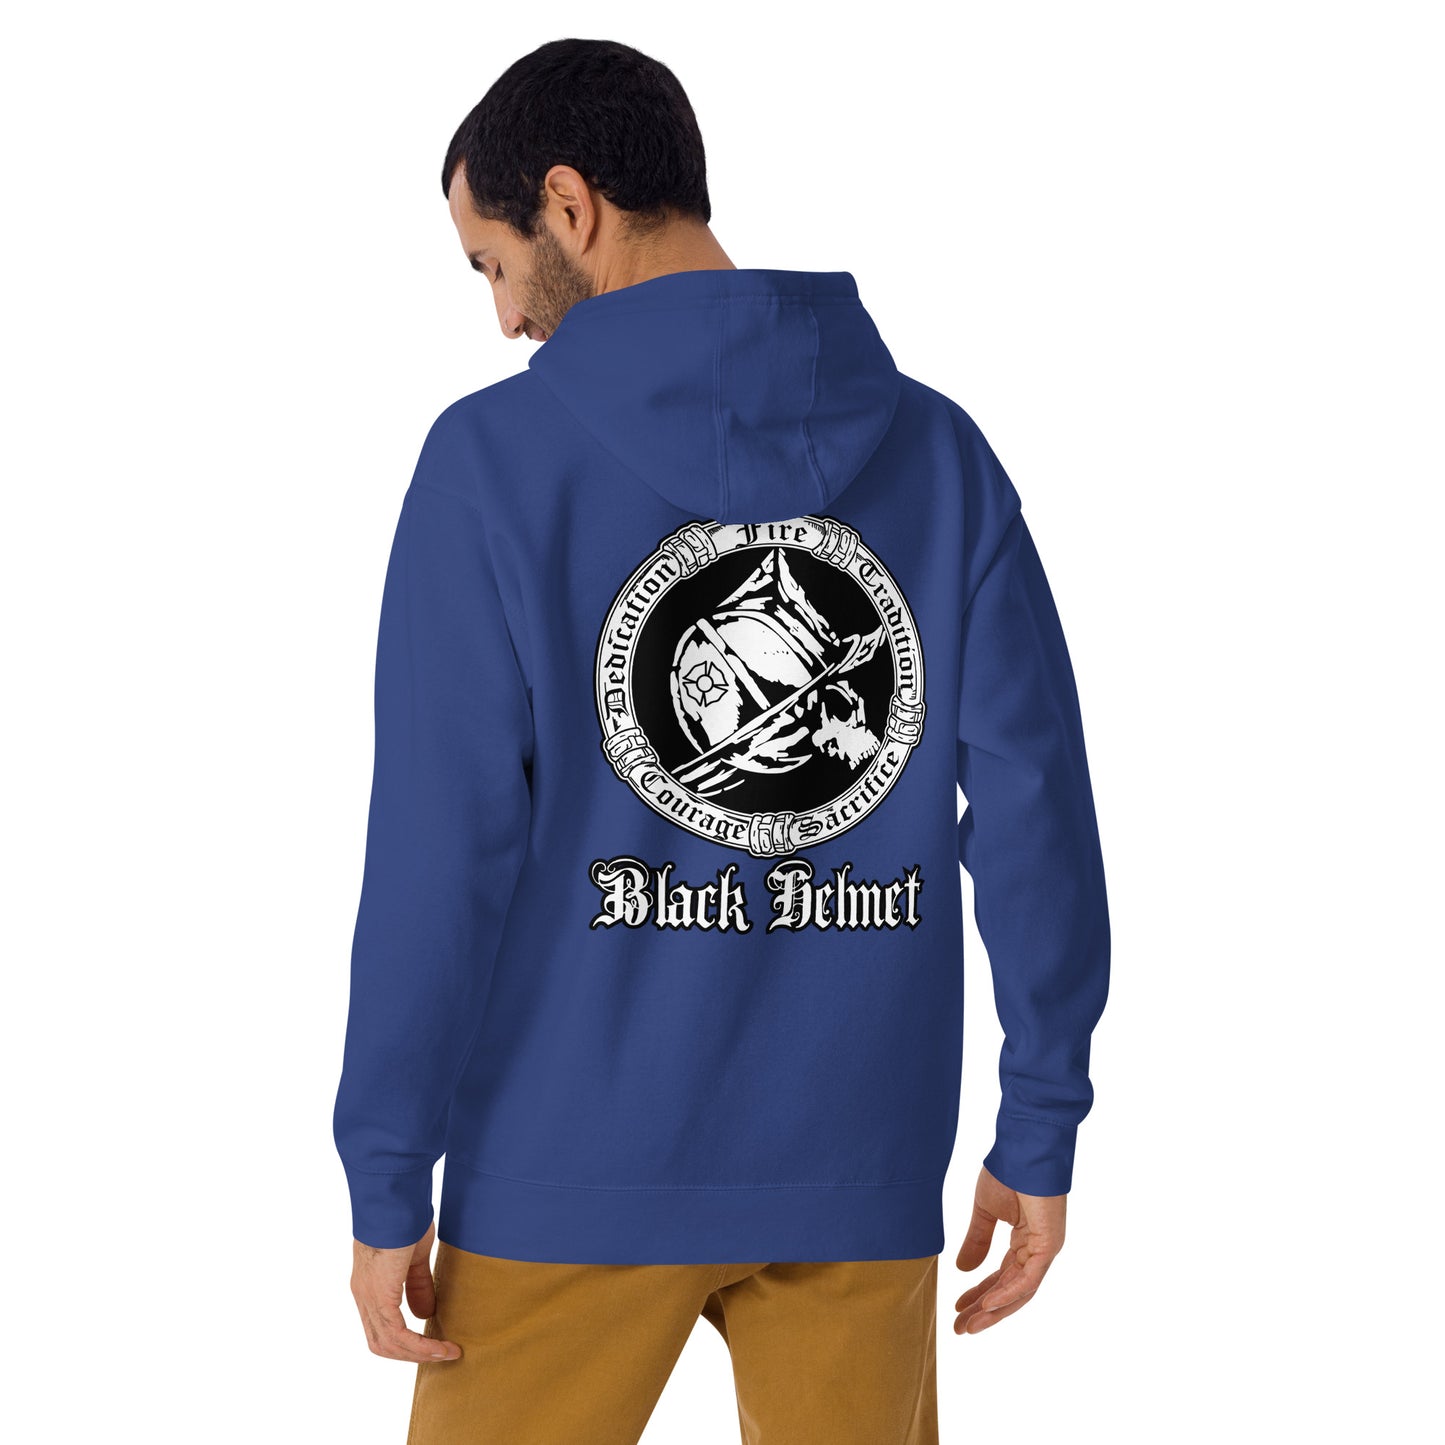 Fight Fire Dedication, Tradition, Sacrifice and Courage Premium Hoodie | Cotton Heritage